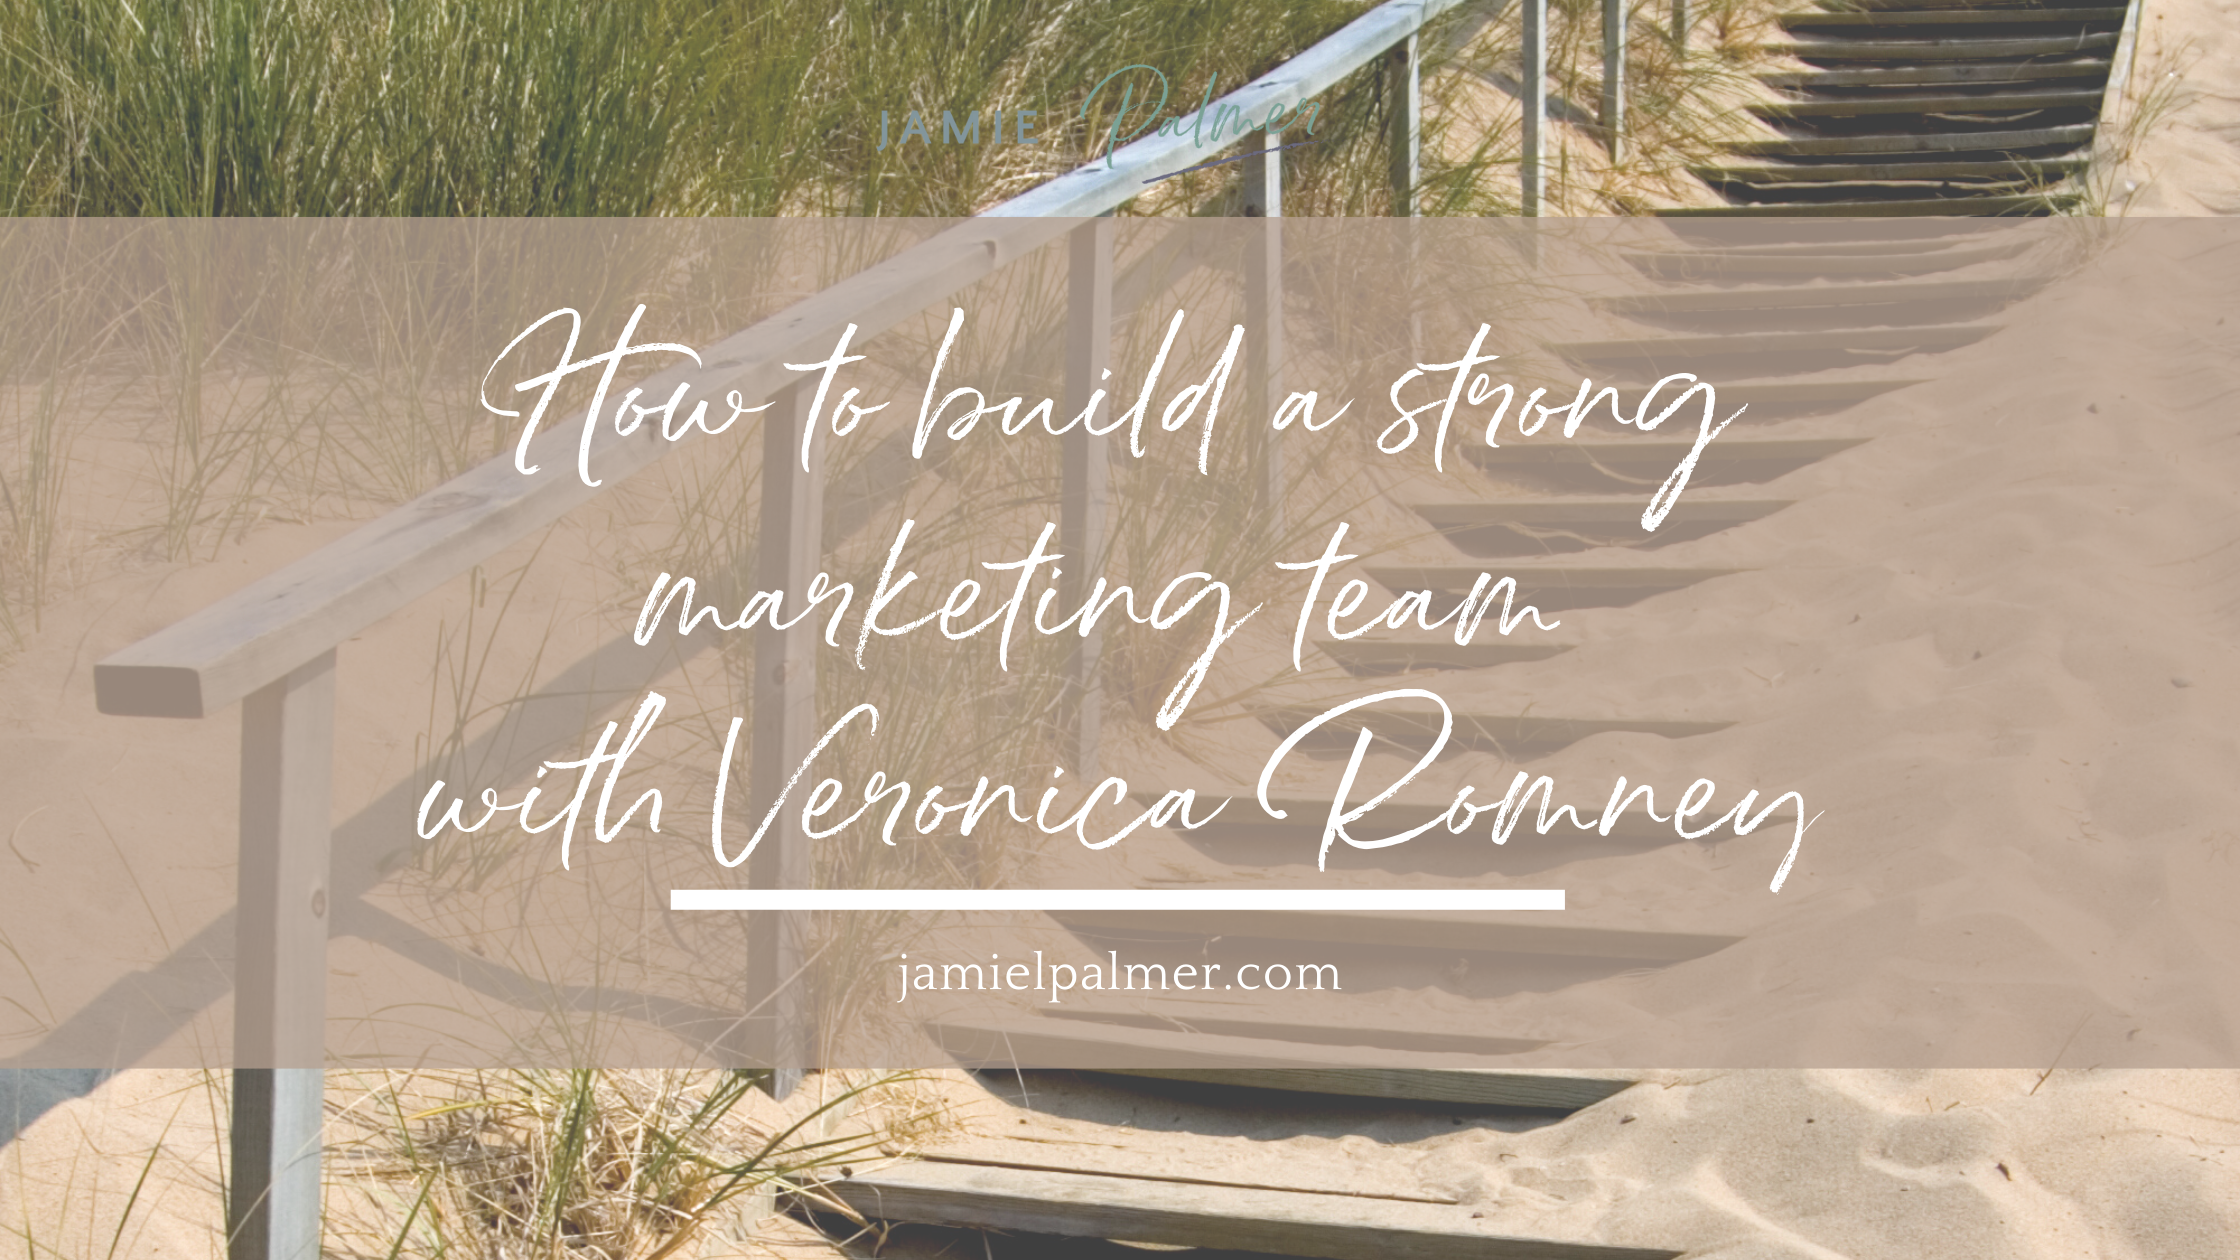 How to build a strong marketing team